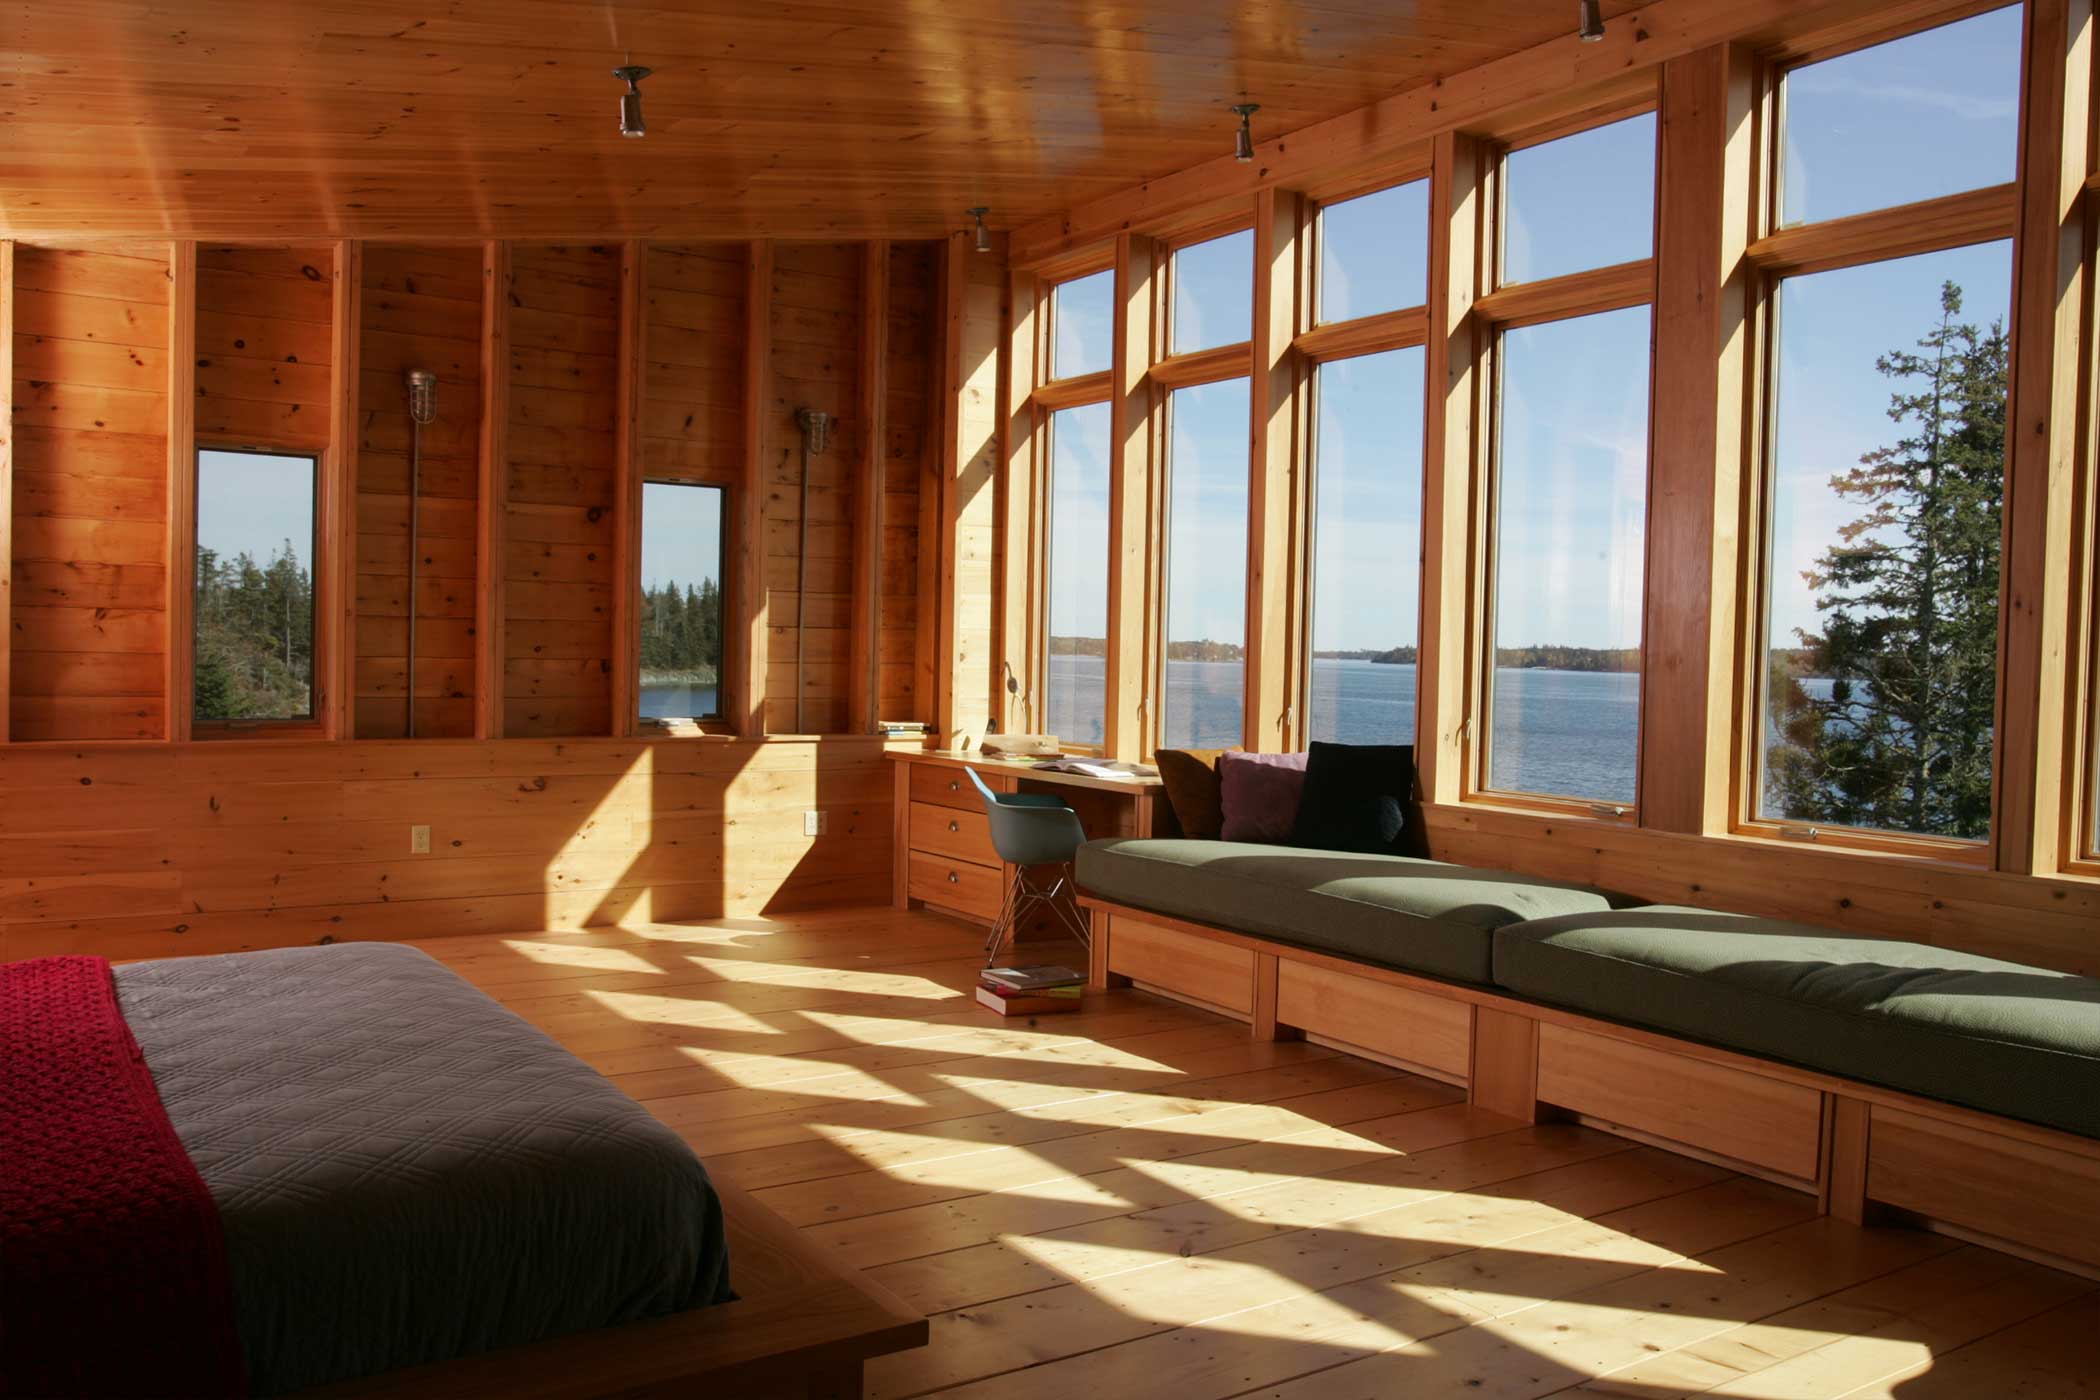 'Island House - Bedroom' by Christopher Campbell Architecture